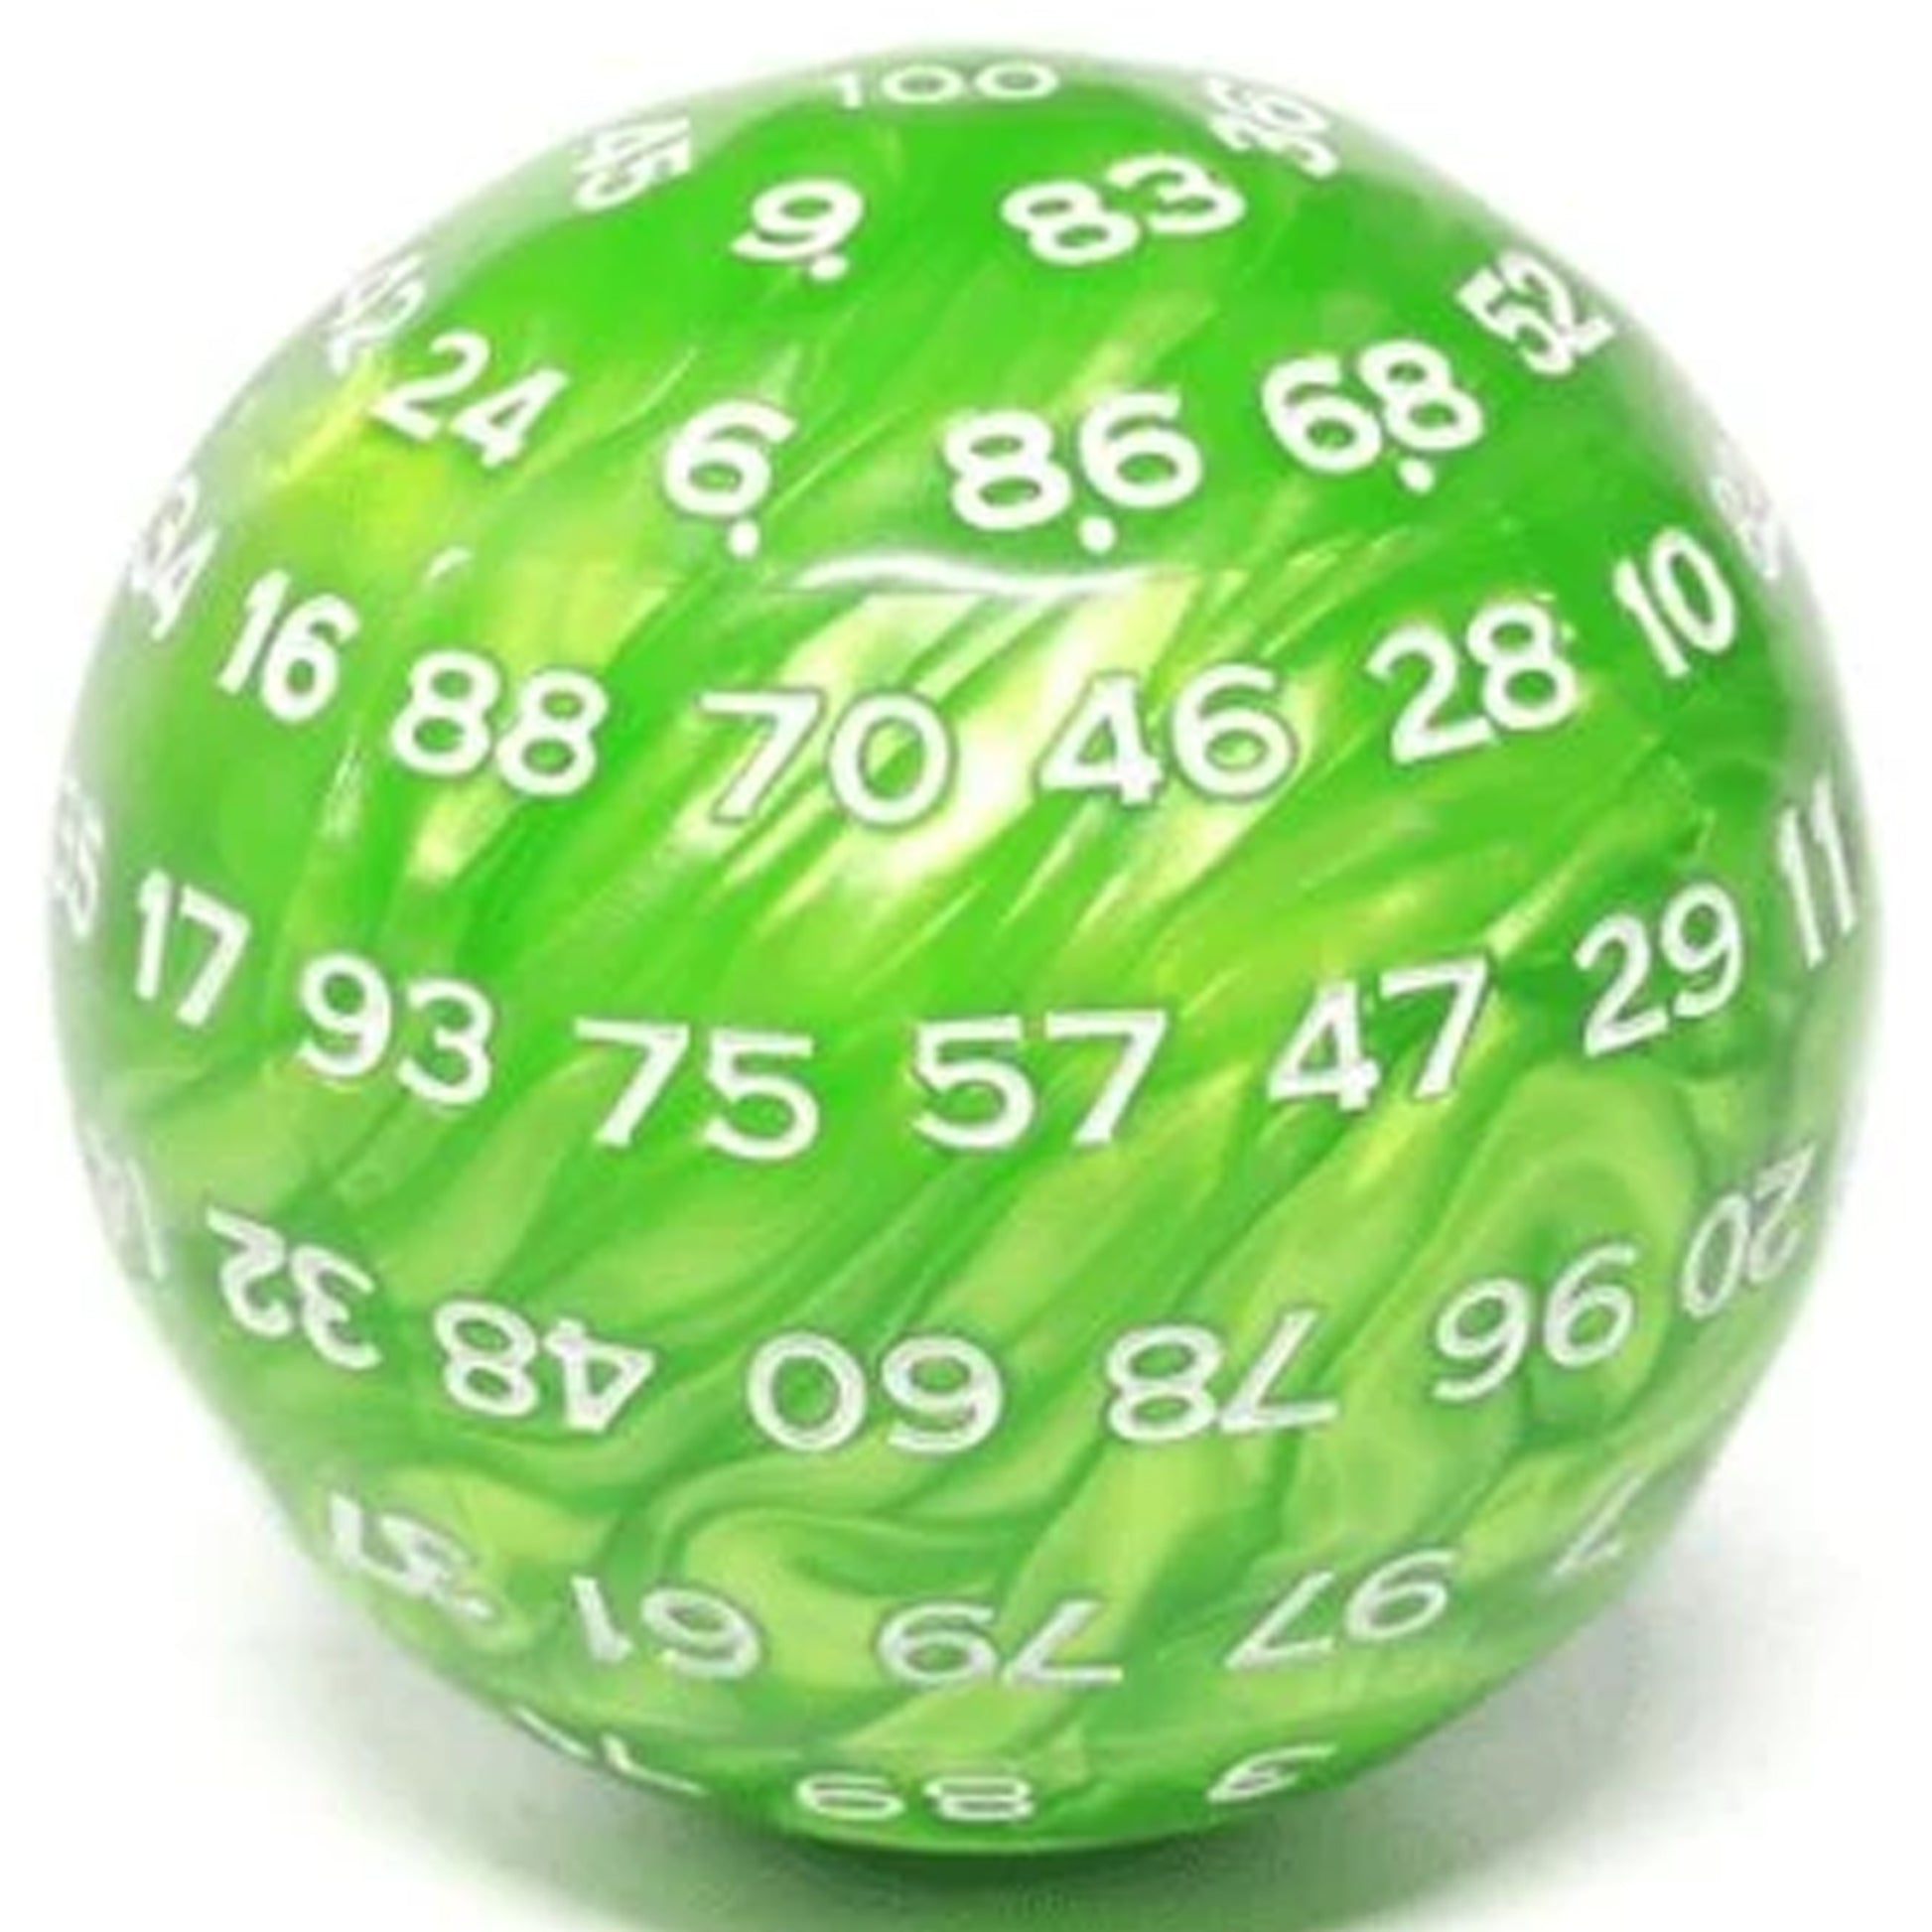 D100 One Hundred Sided Dice - Pearl Green with White Numbers | Happy Piranha